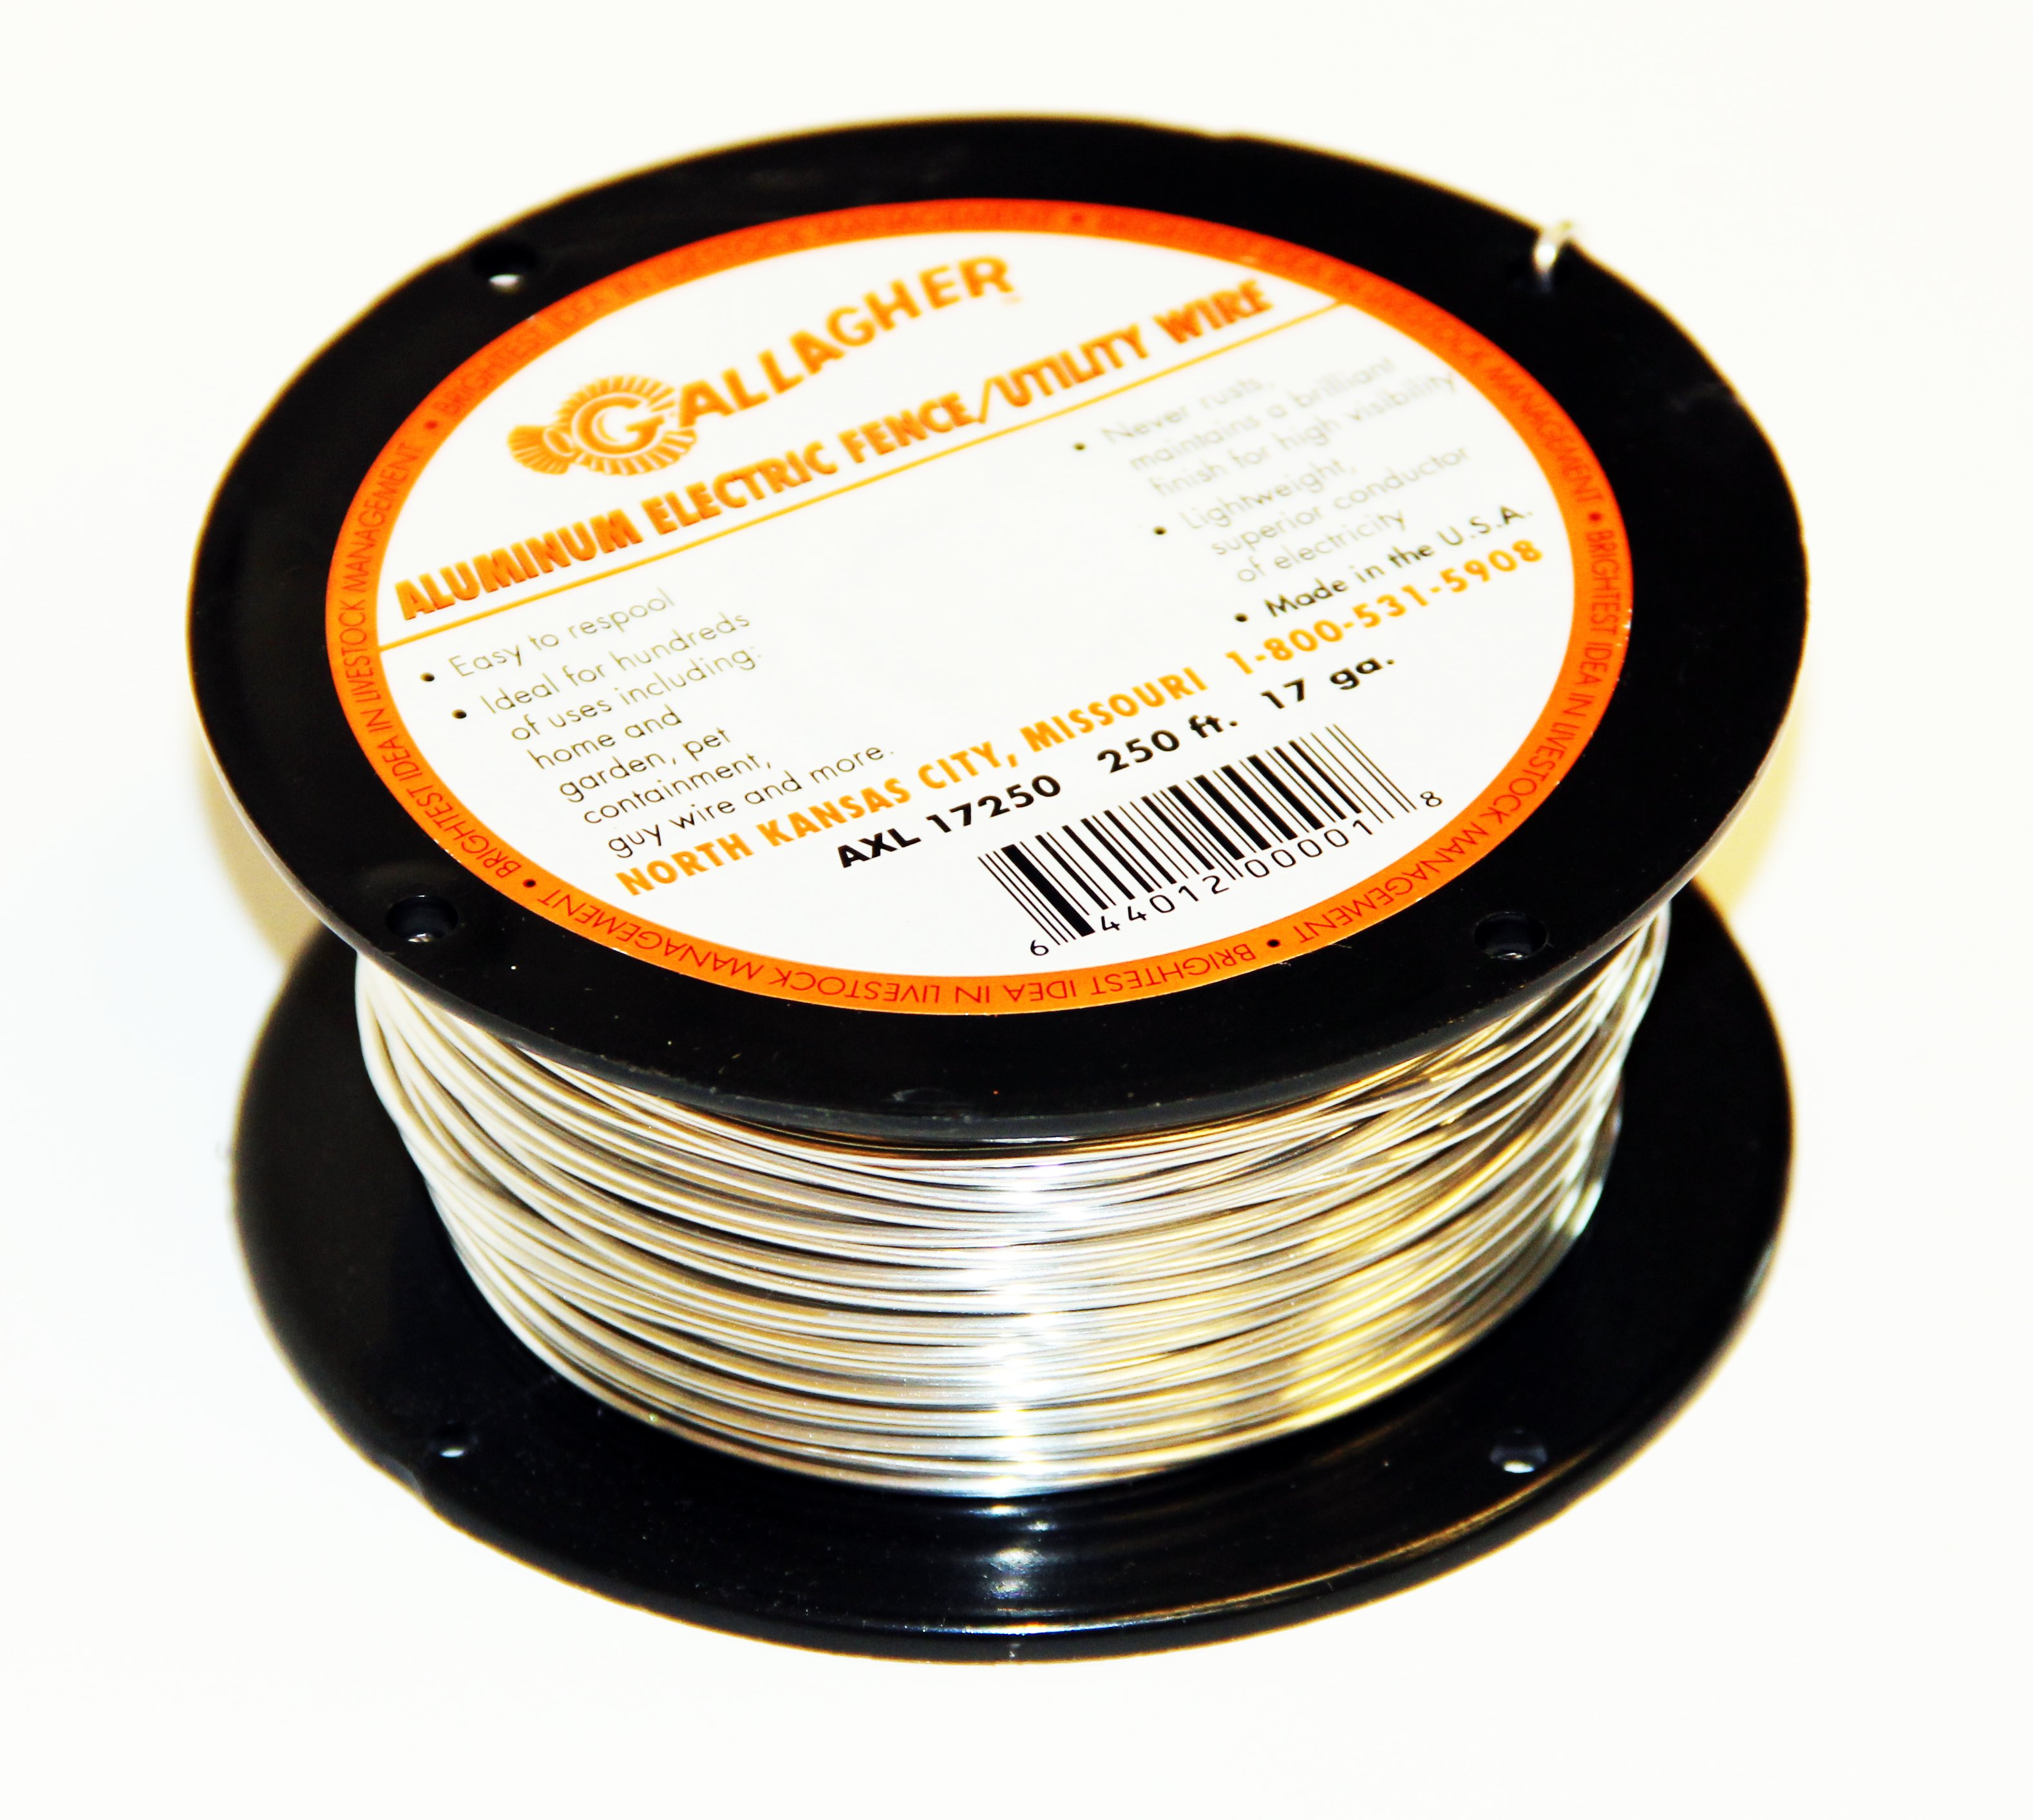 Gallagher XL Aluminum Fence Wire 14 ga x 1320 ft